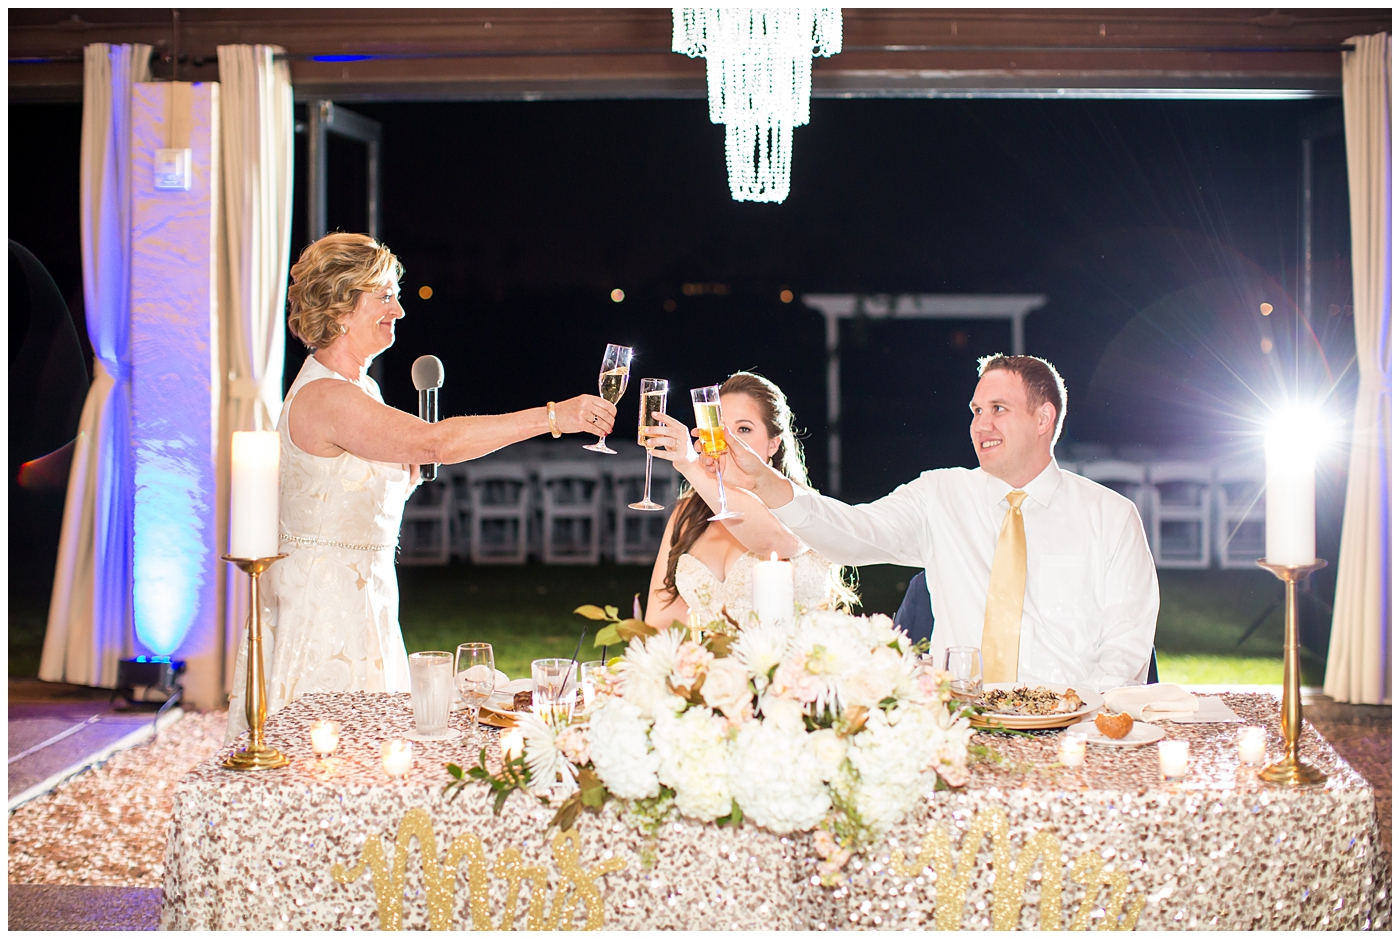 wedding toasts at reception to bride and groom in ballroom